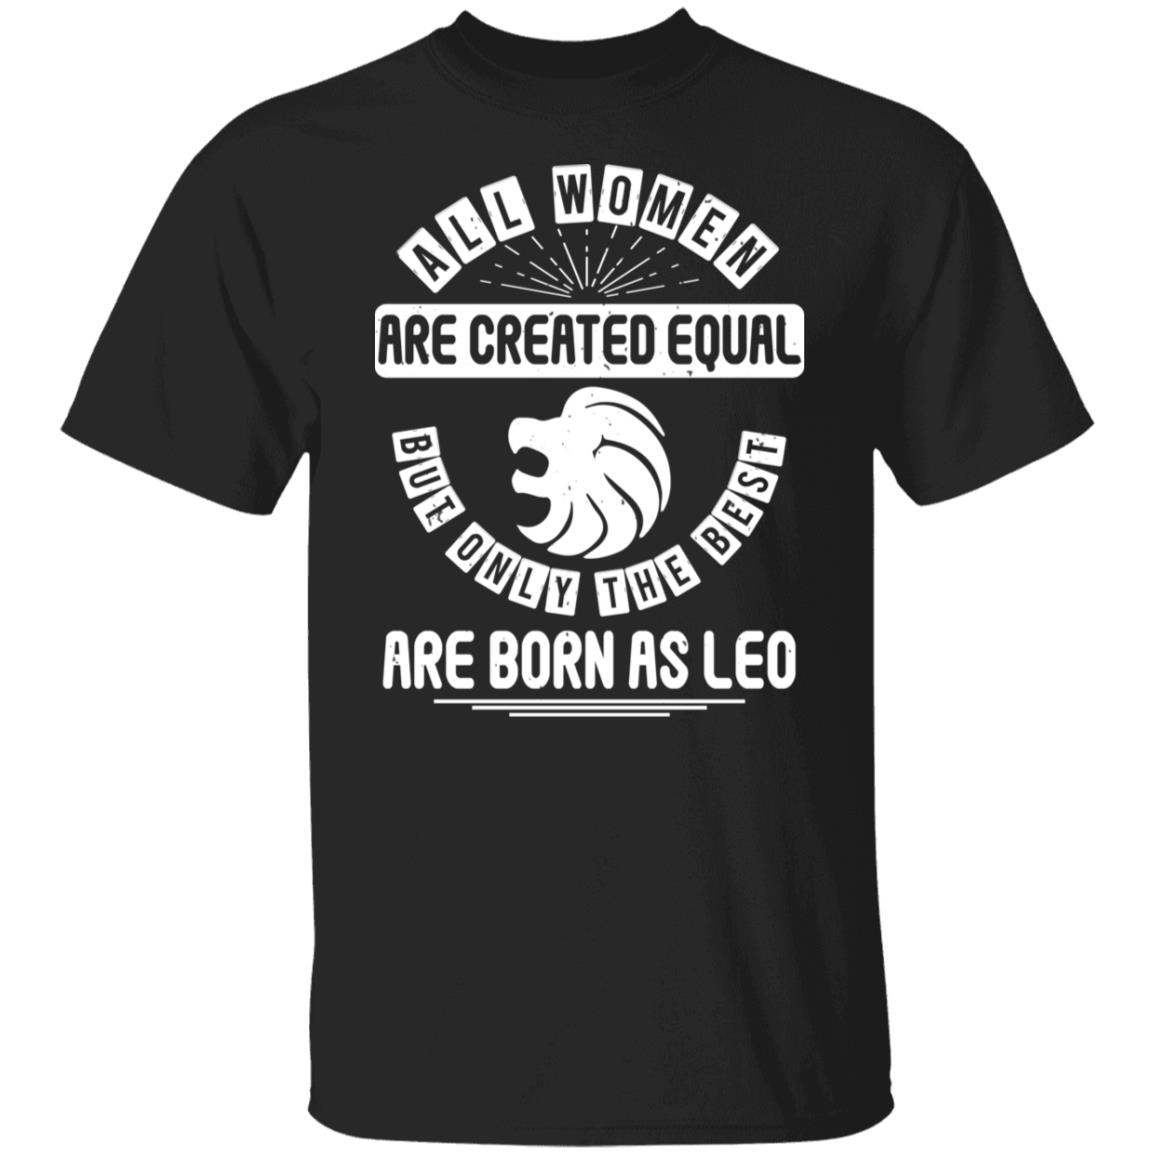 All Women Are Created Equal But Only The Best Are Born as Leo Birthday Gift Shirt